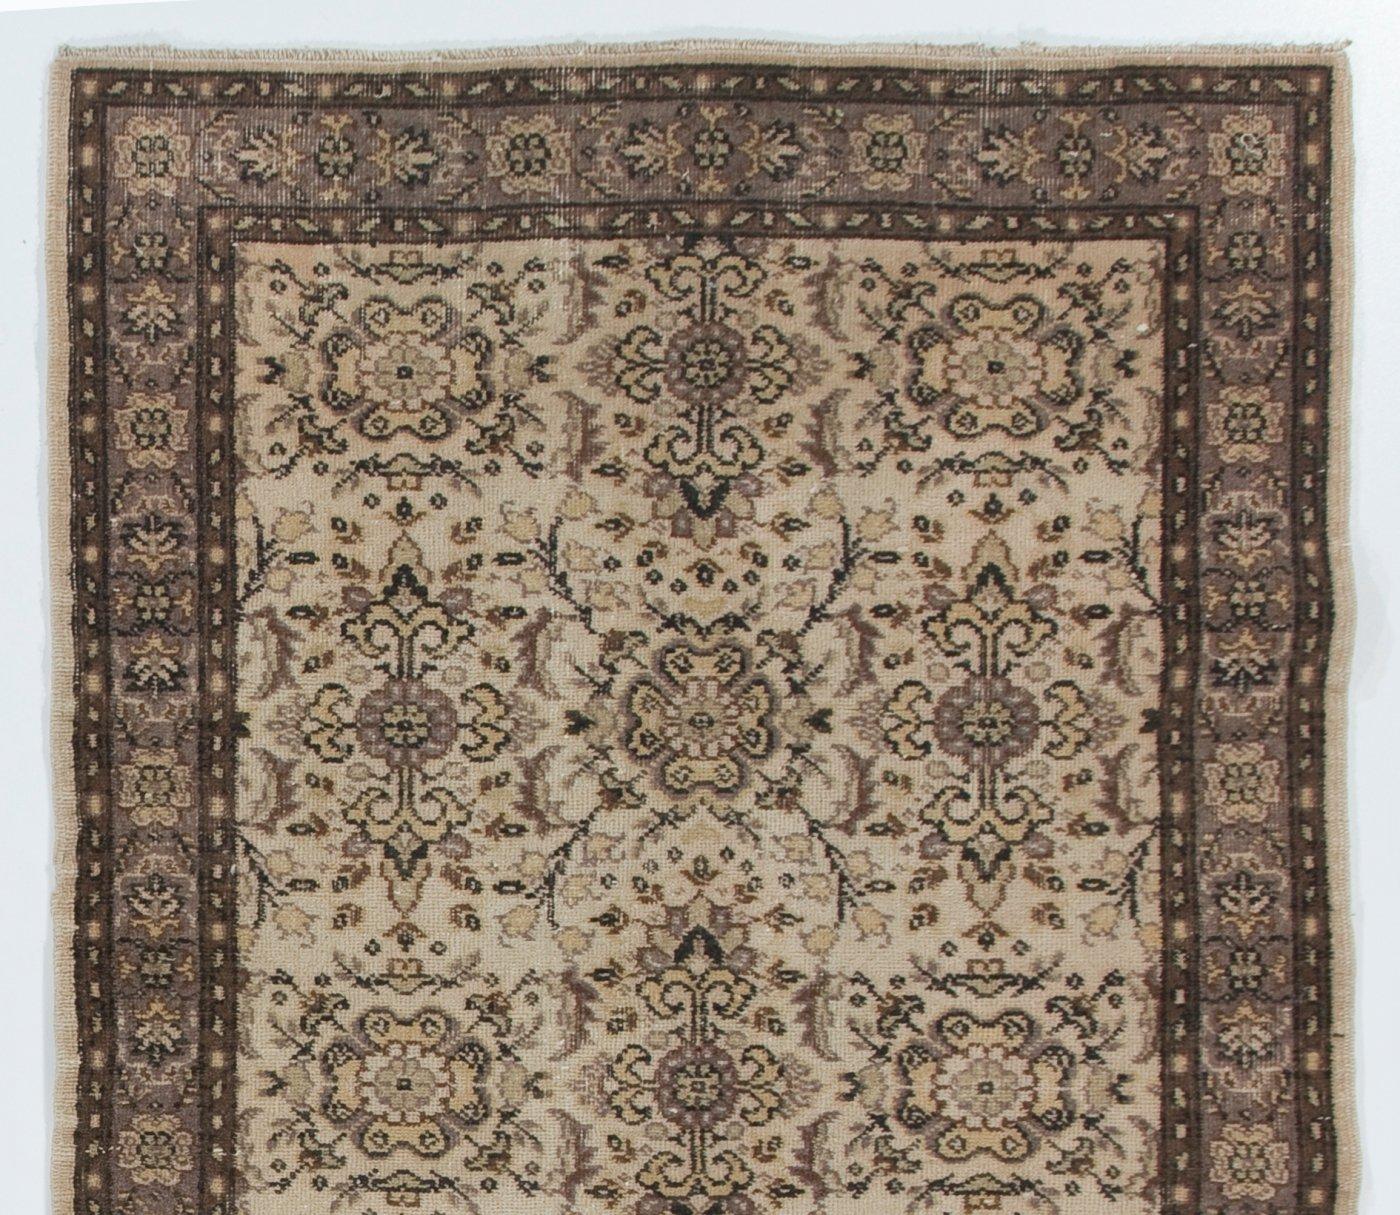 A vintage Turkish rug. Finely hand-knotted with even medium wool pile on cotton foundation. Very good condition. Sturdy and as clean as a brand new rug (deep washed professionally). Measures:4x7 ft.
 